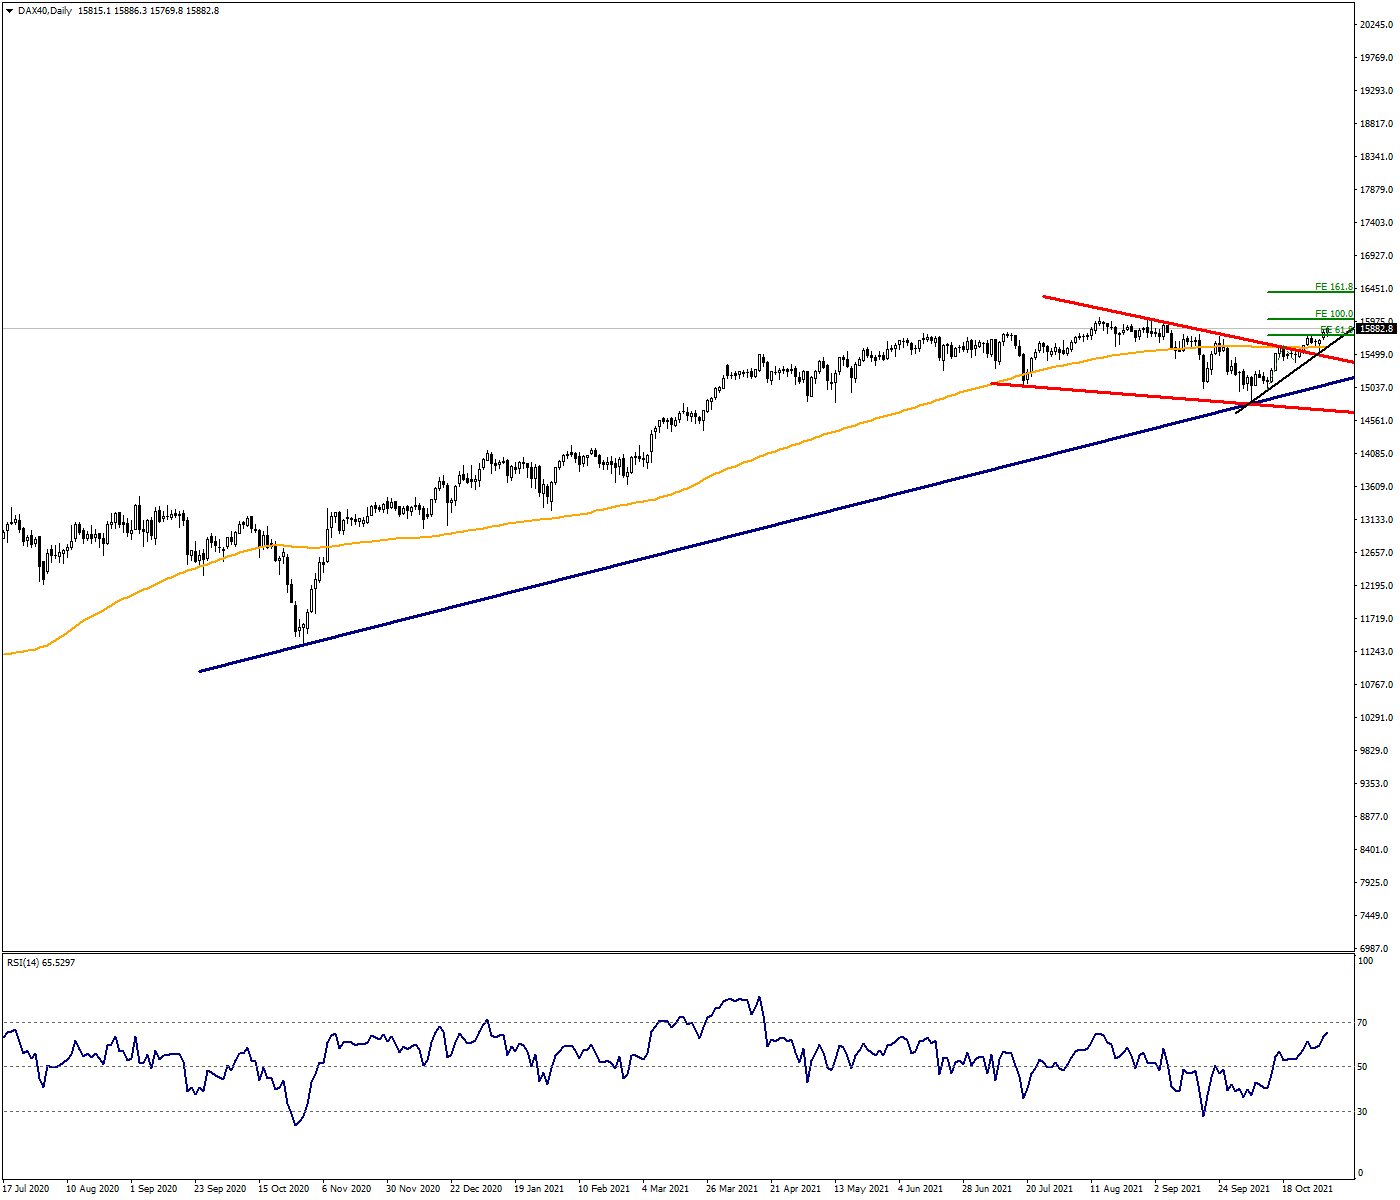 DAX40 is targeting 2-month high